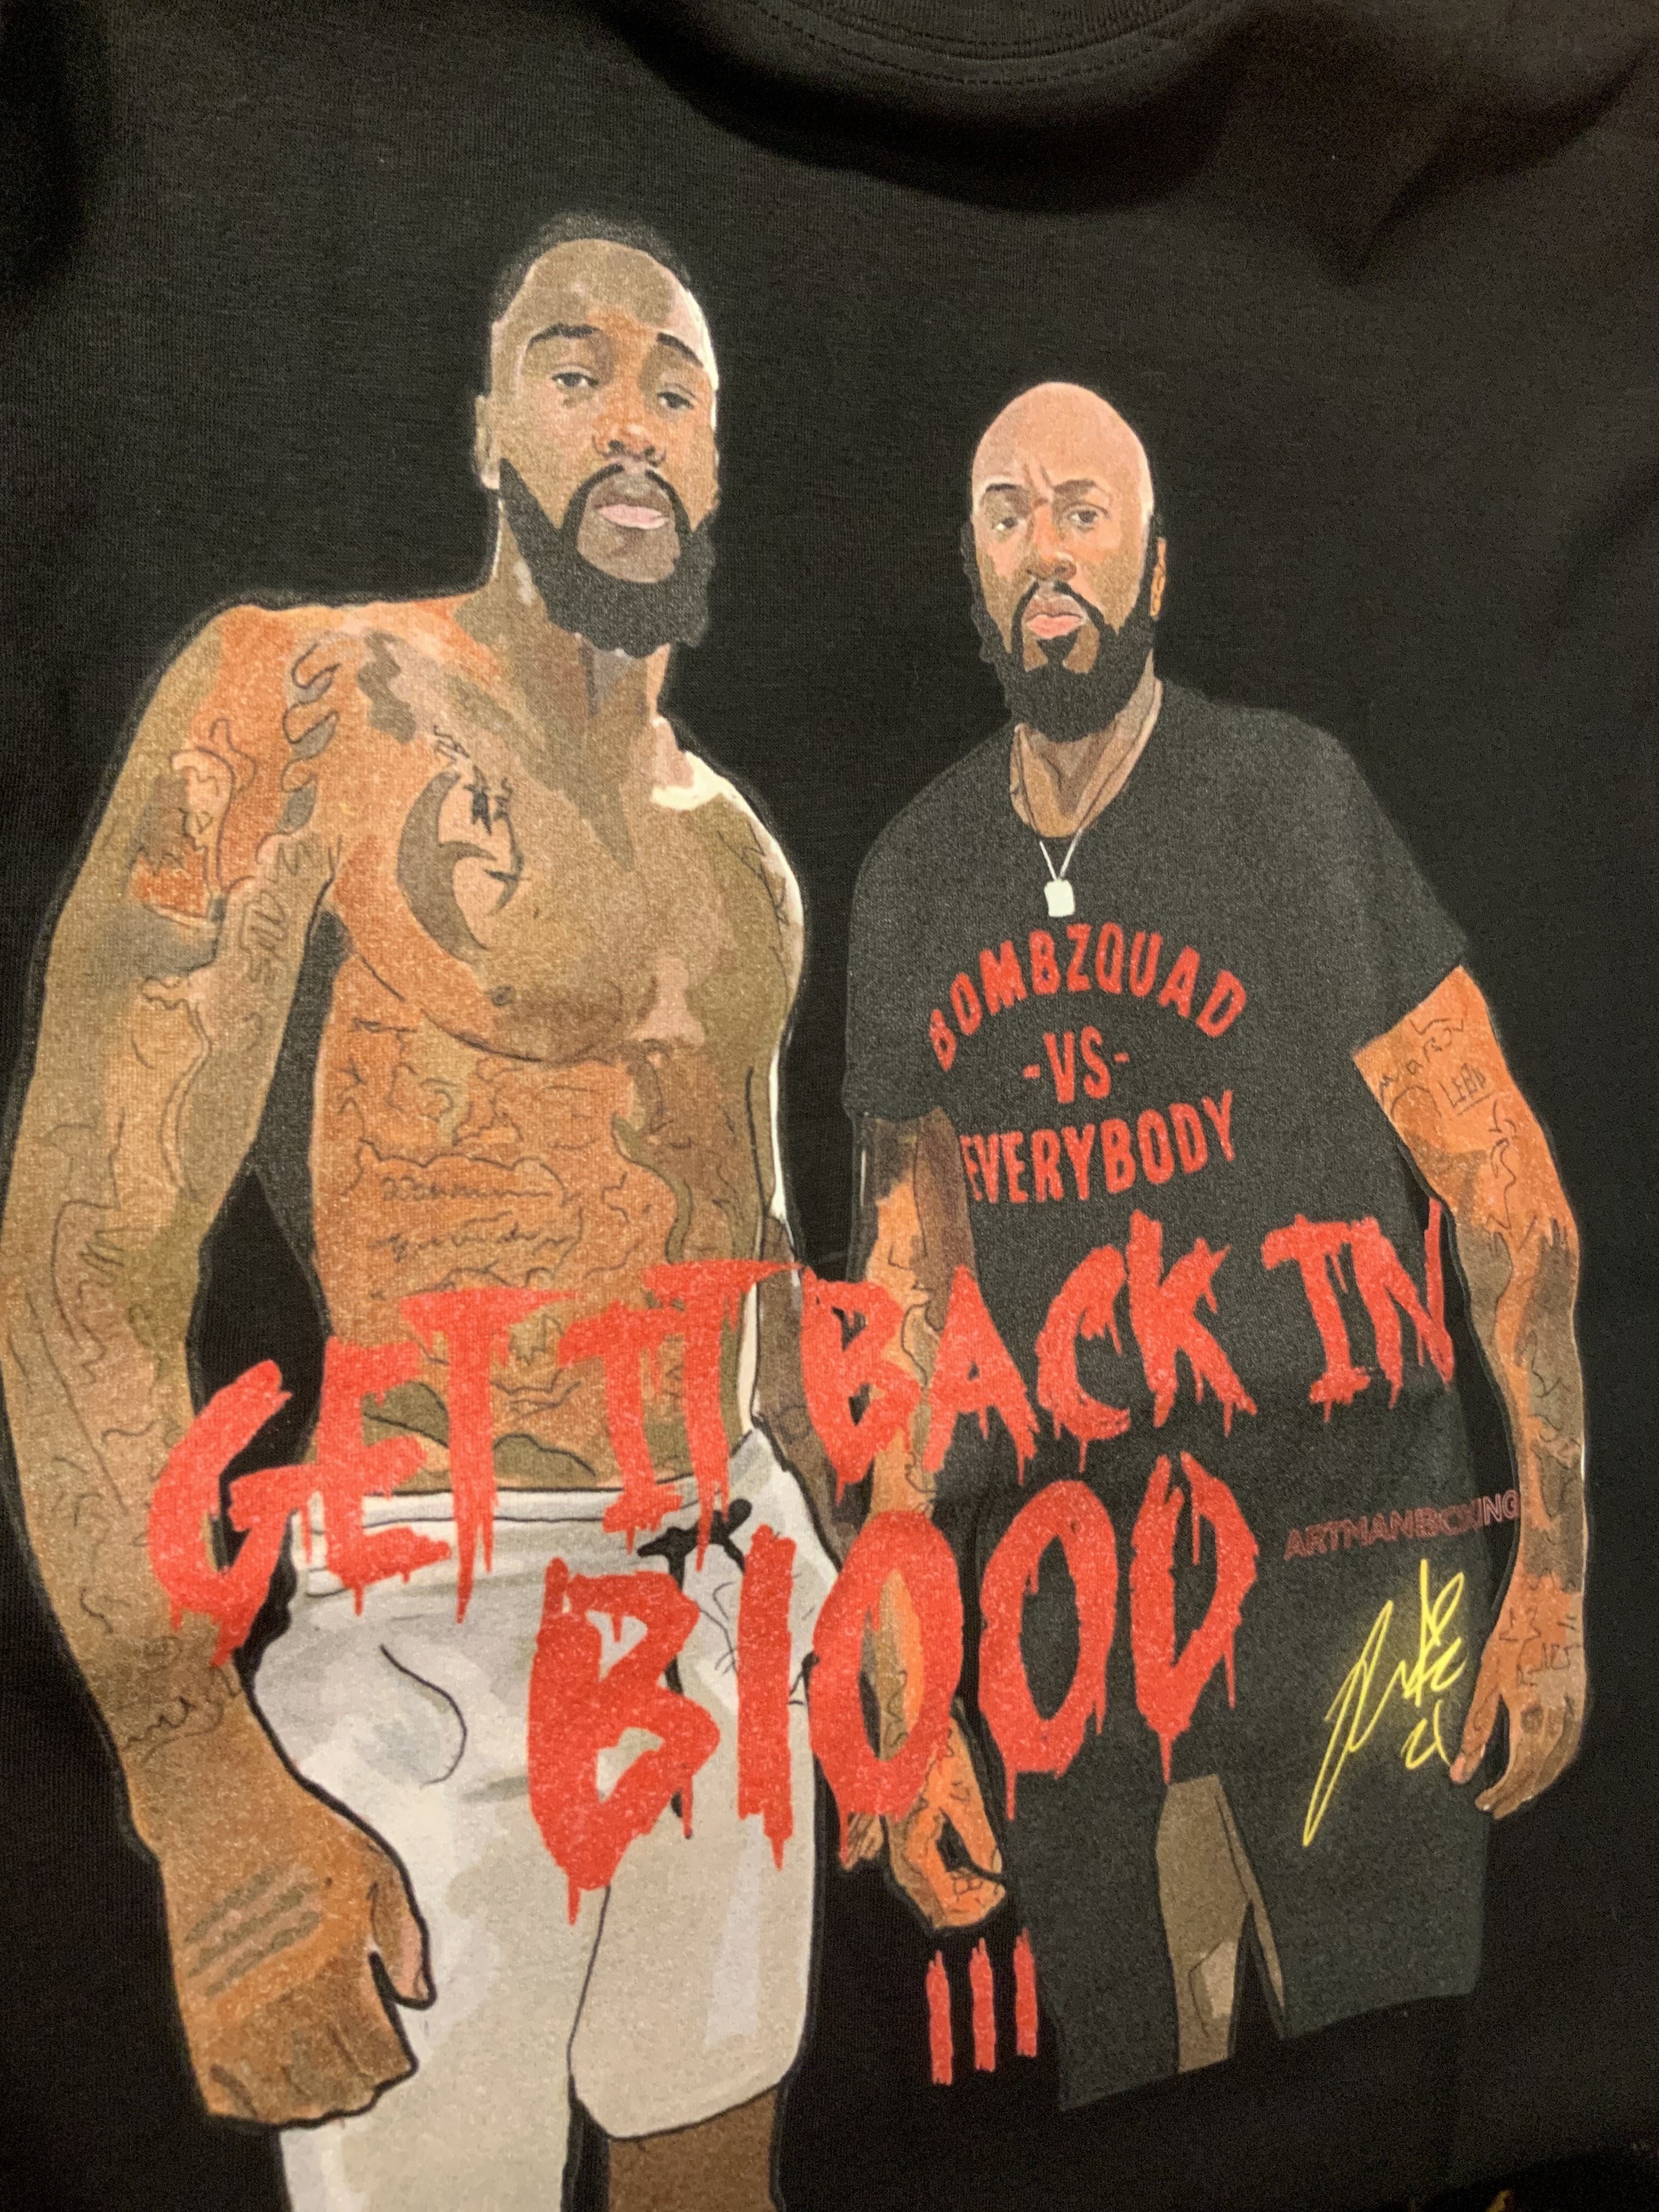 Back in Blood shirt